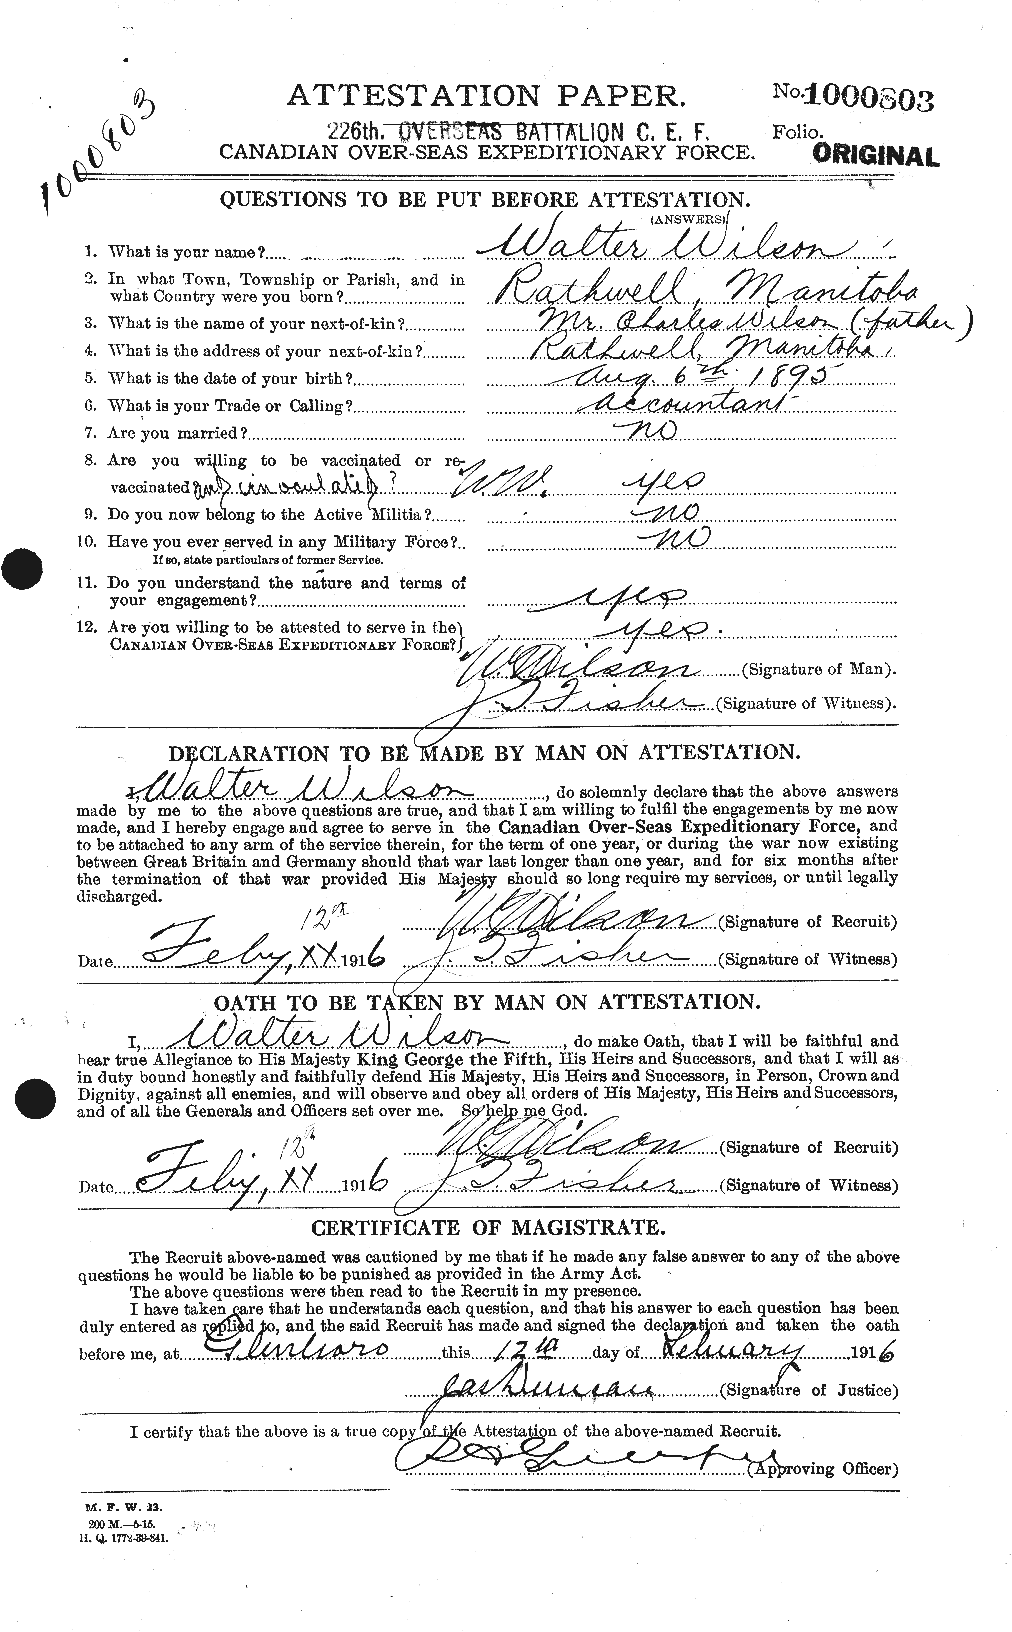 Personnel Records of the First World War - CEF 681735a